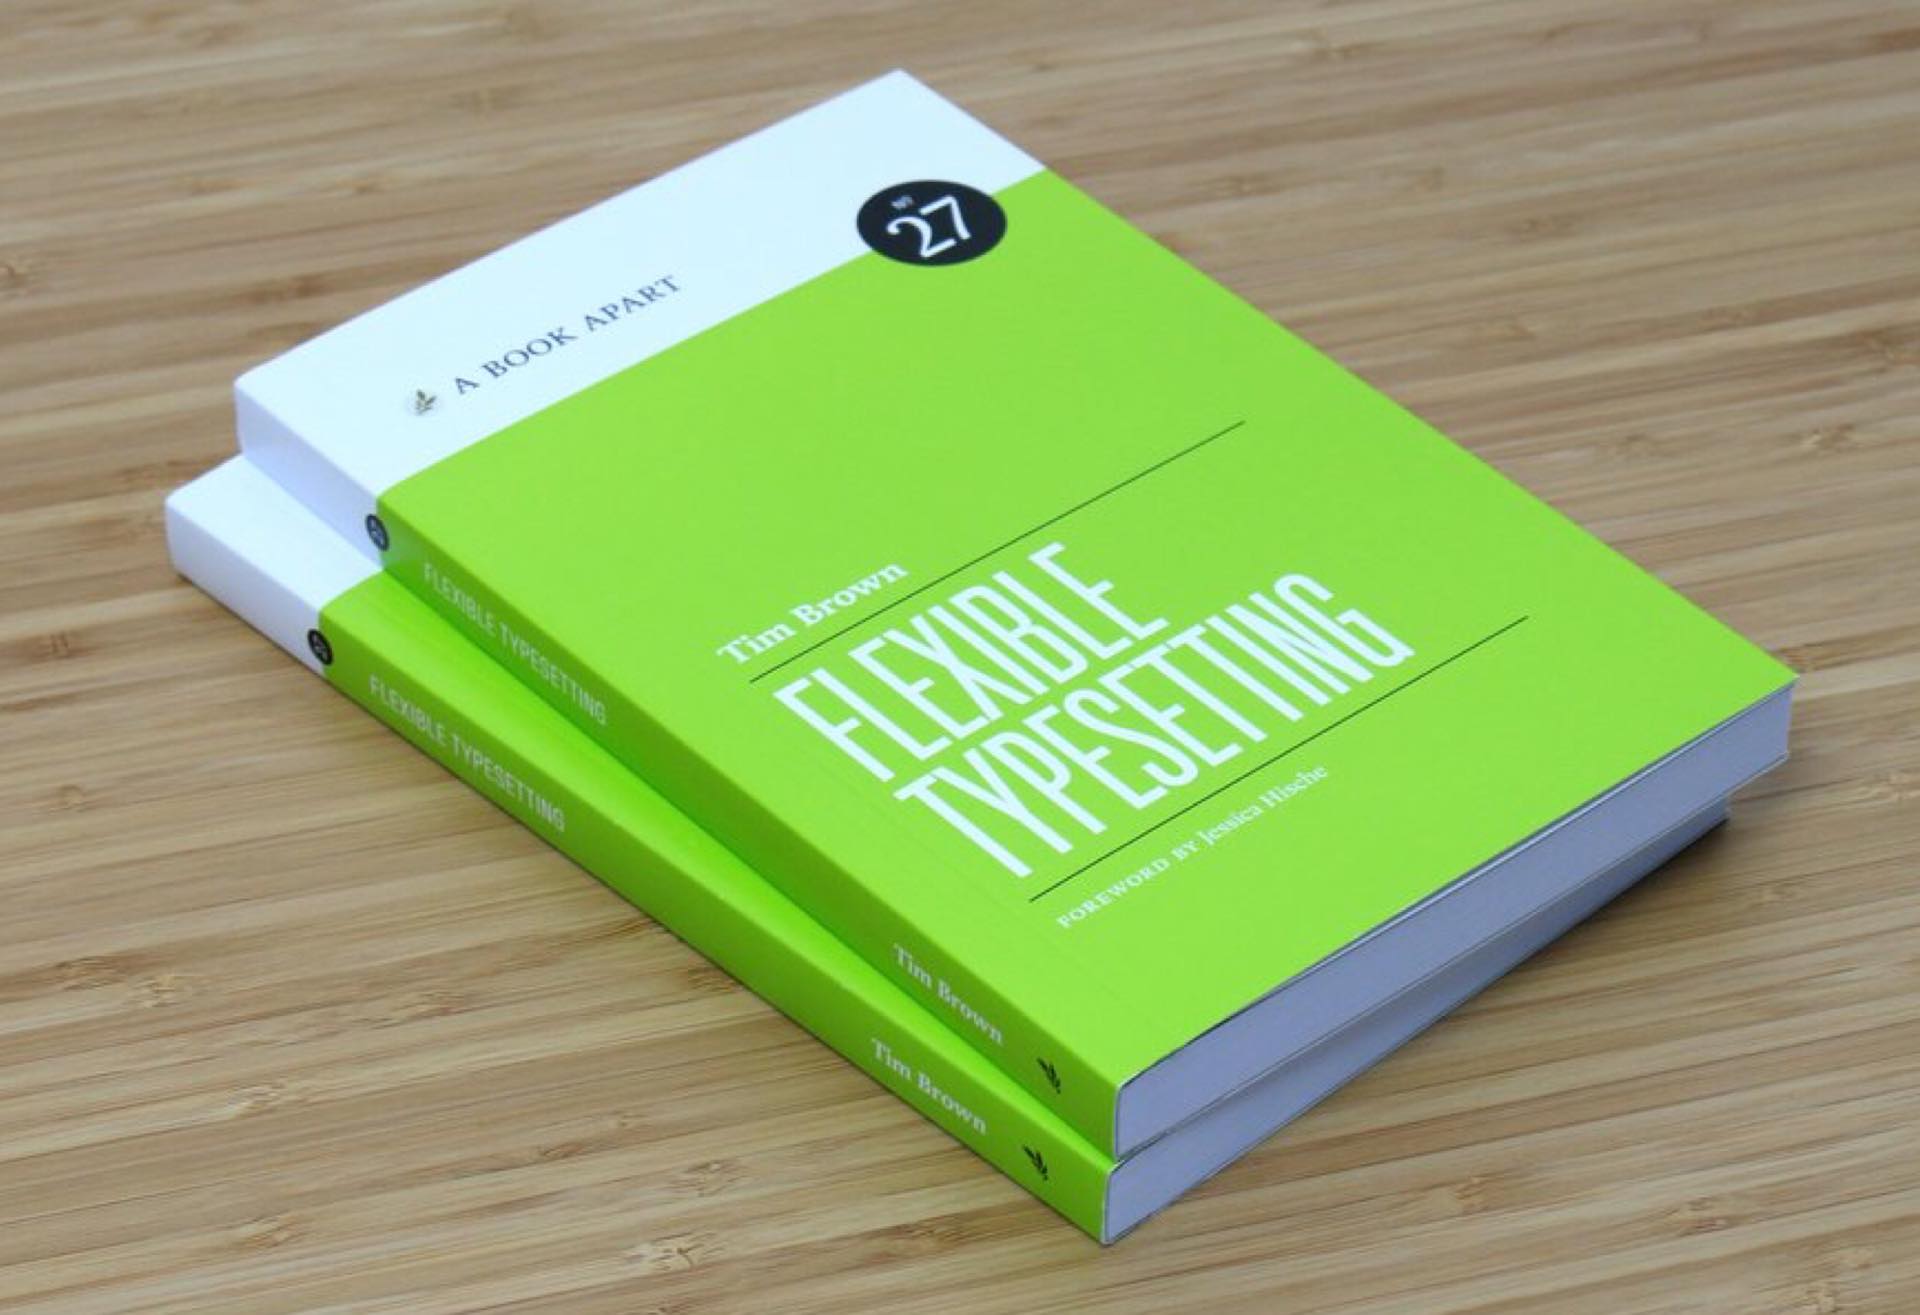 flexible-typesetting-by-tim-brown-a-book-apart